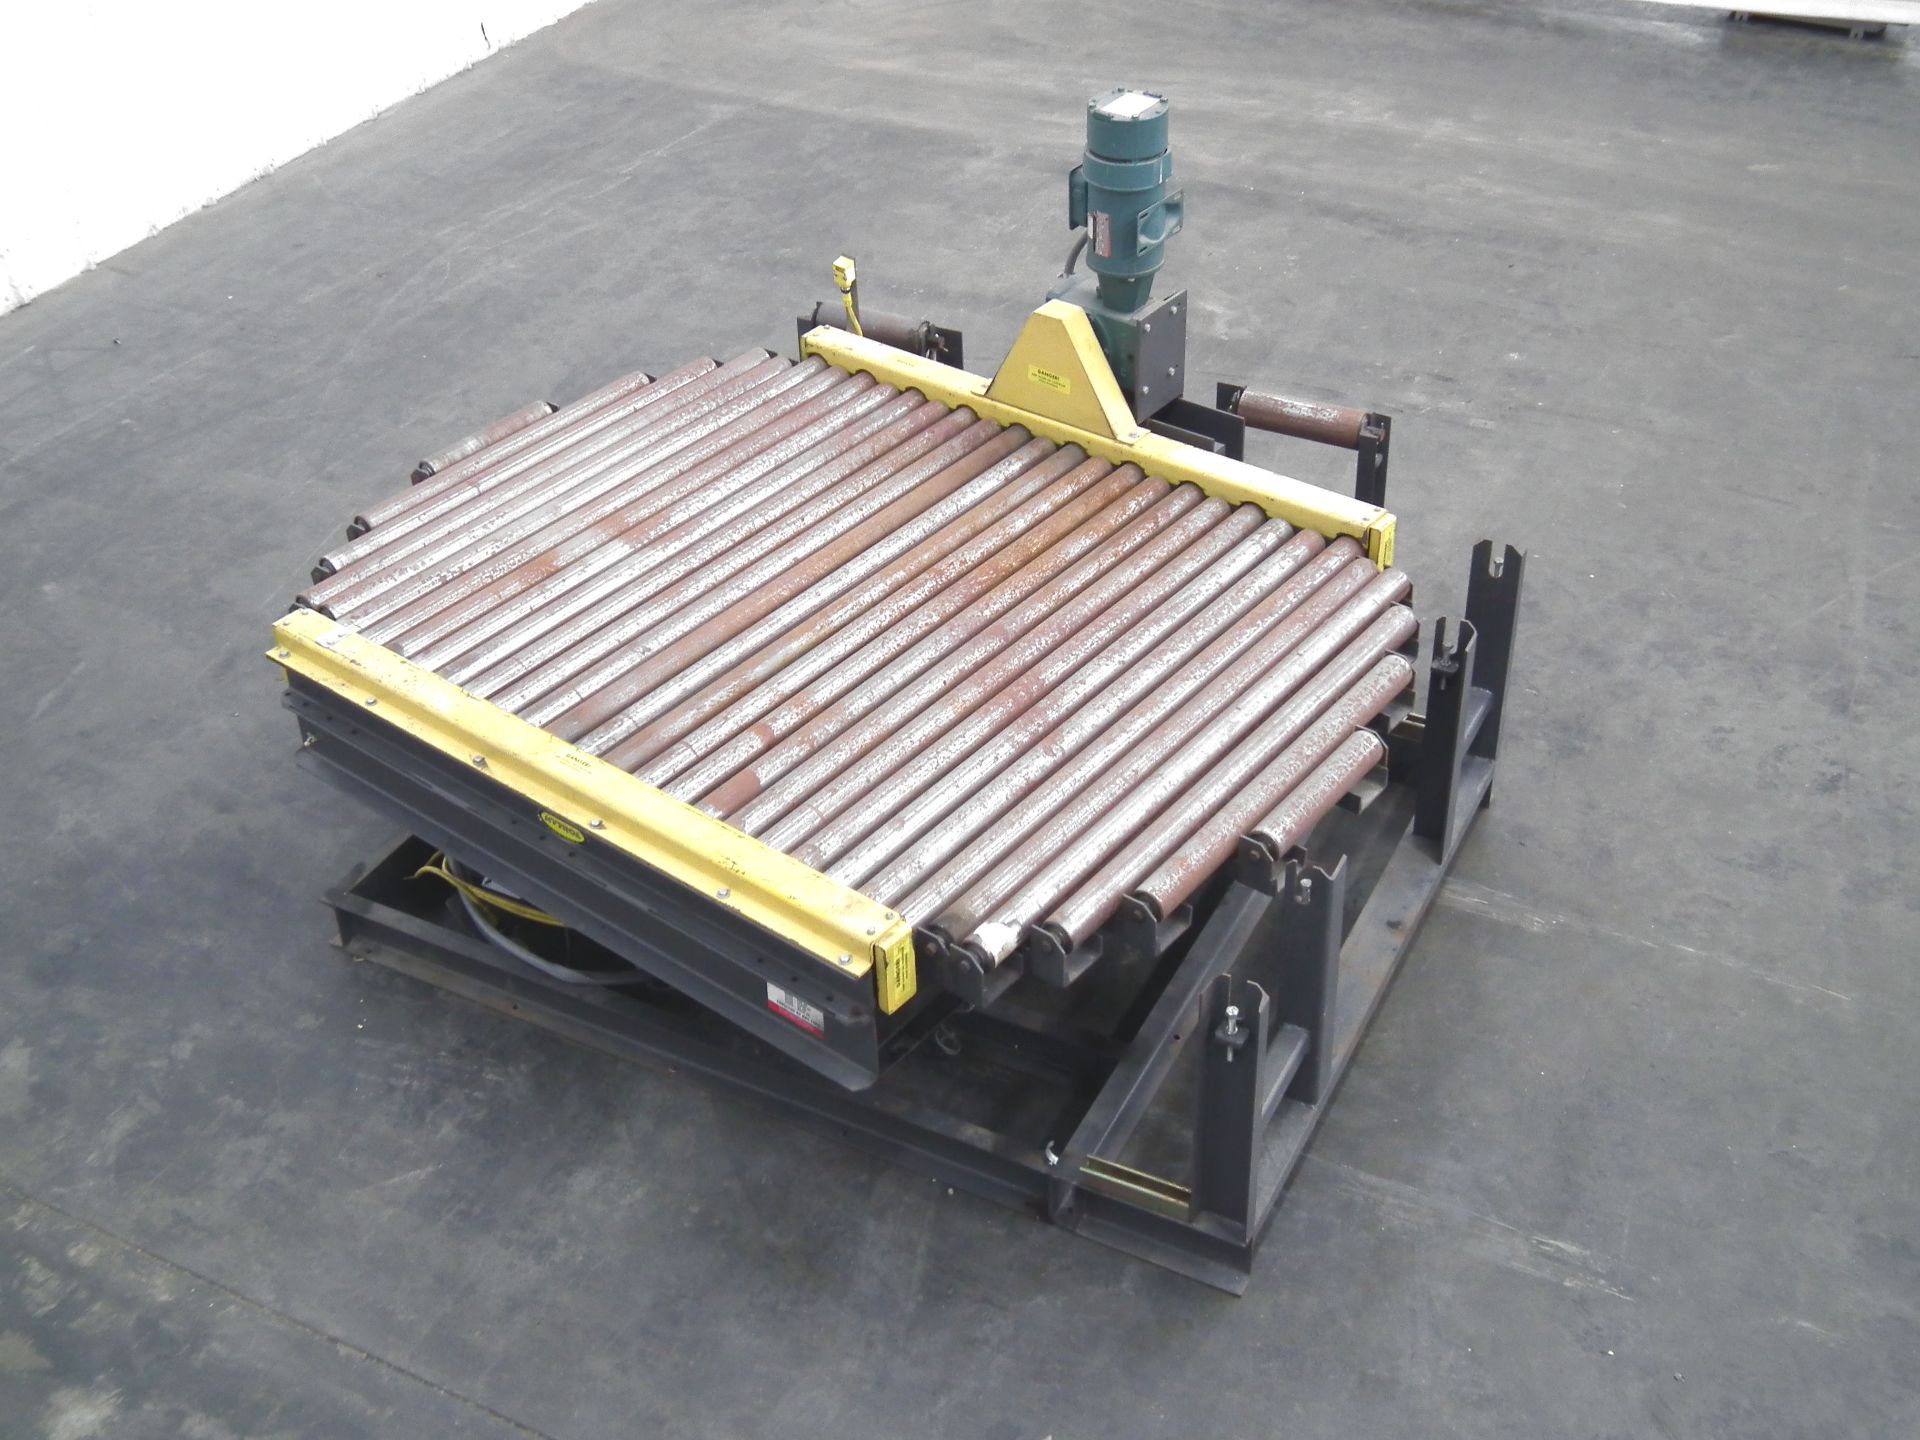 Hytrol Turntable for Full Pallets 90 Degree Motion A9776 - Image 6 of 8